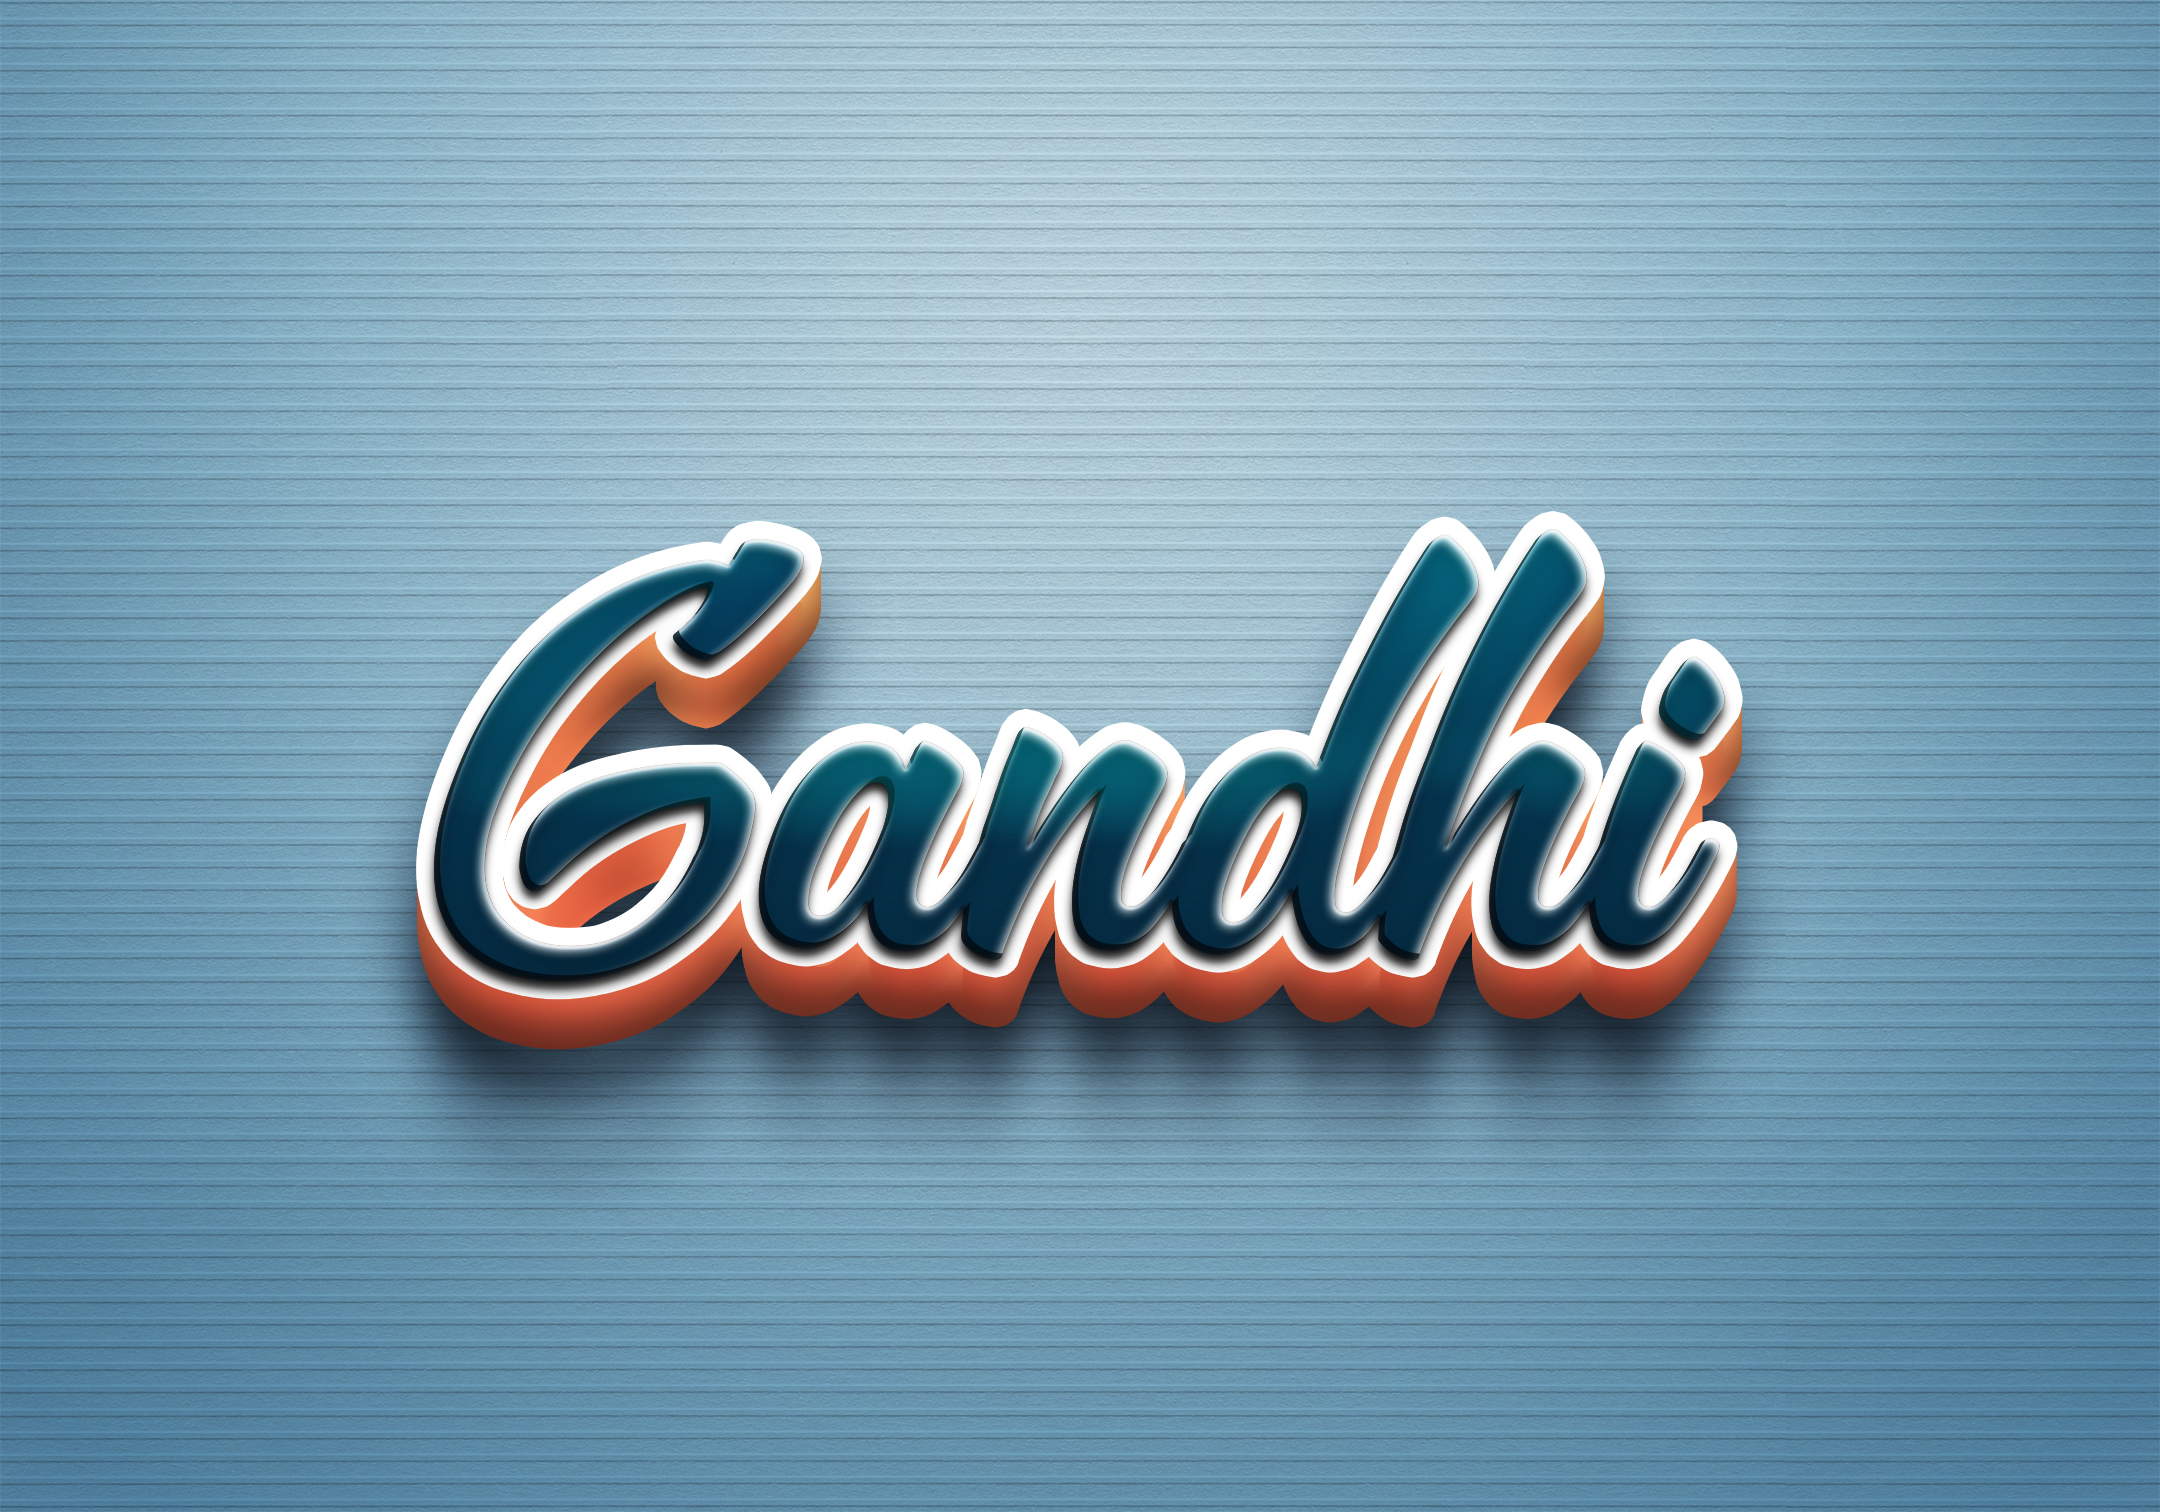 Gandhi Logo Stock Photos and Pictures - 666 Images | Shutterstock